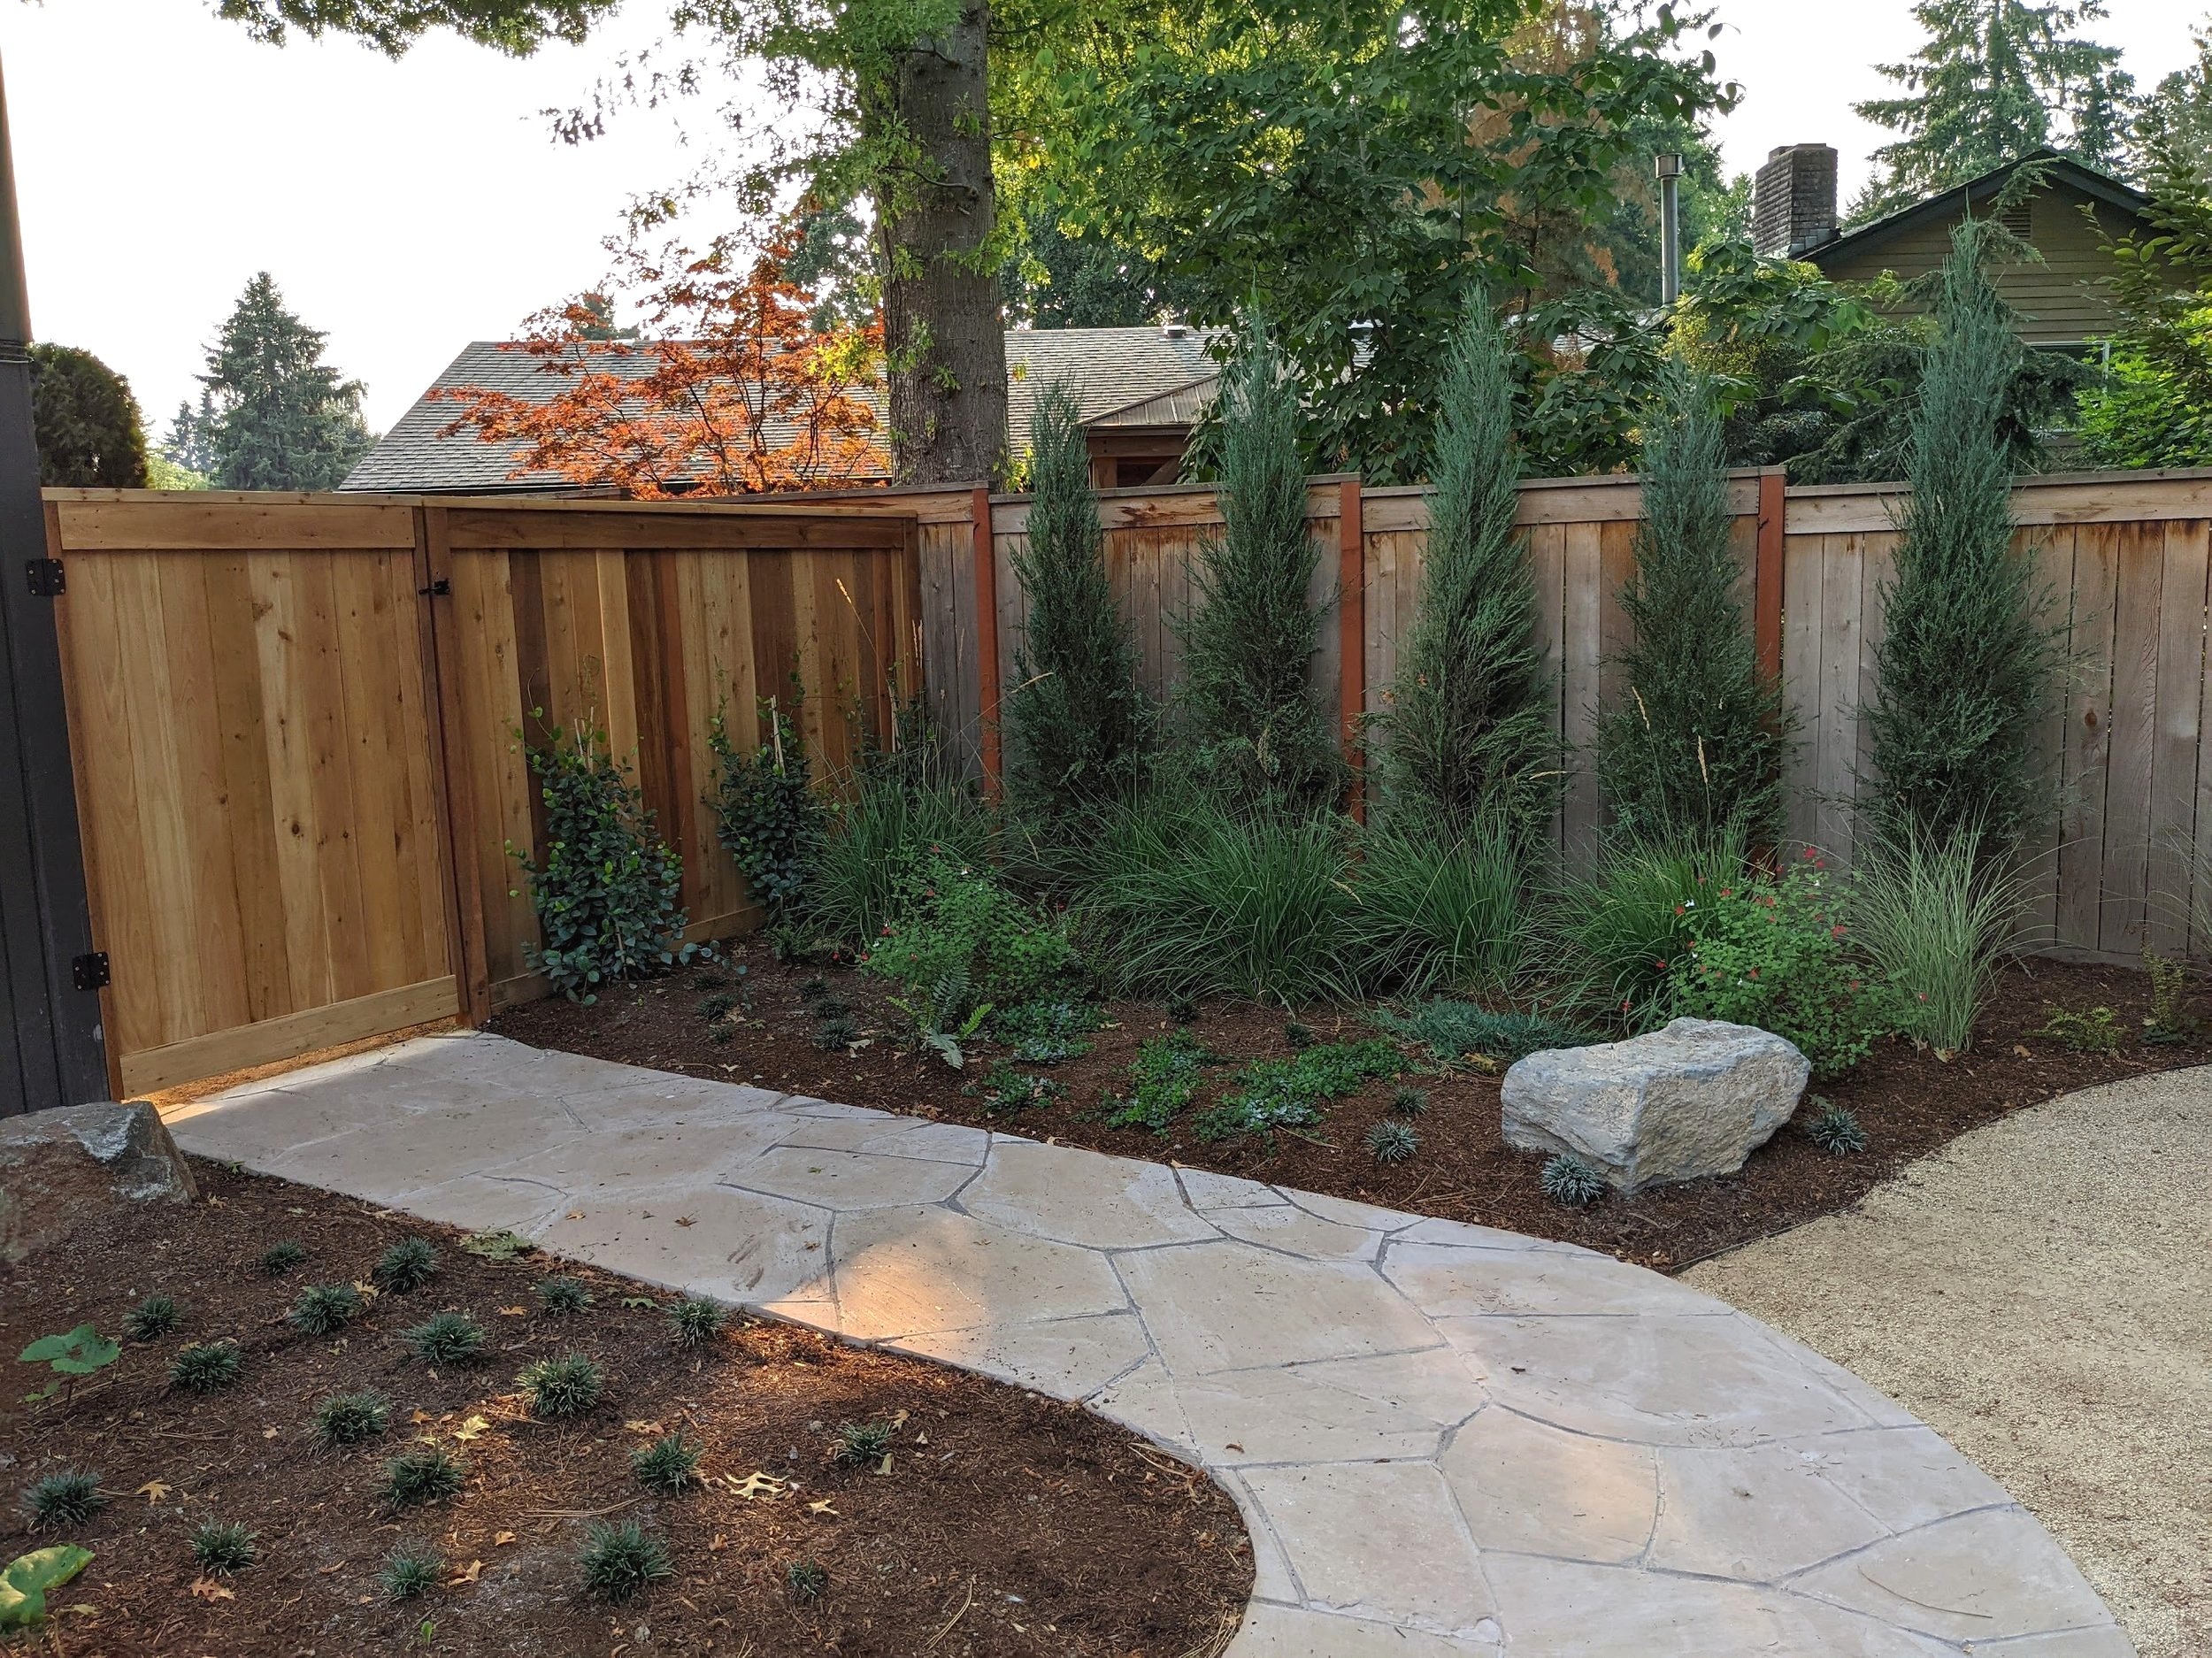 Fenced backyard, mulch garden with small trees and concrete path way